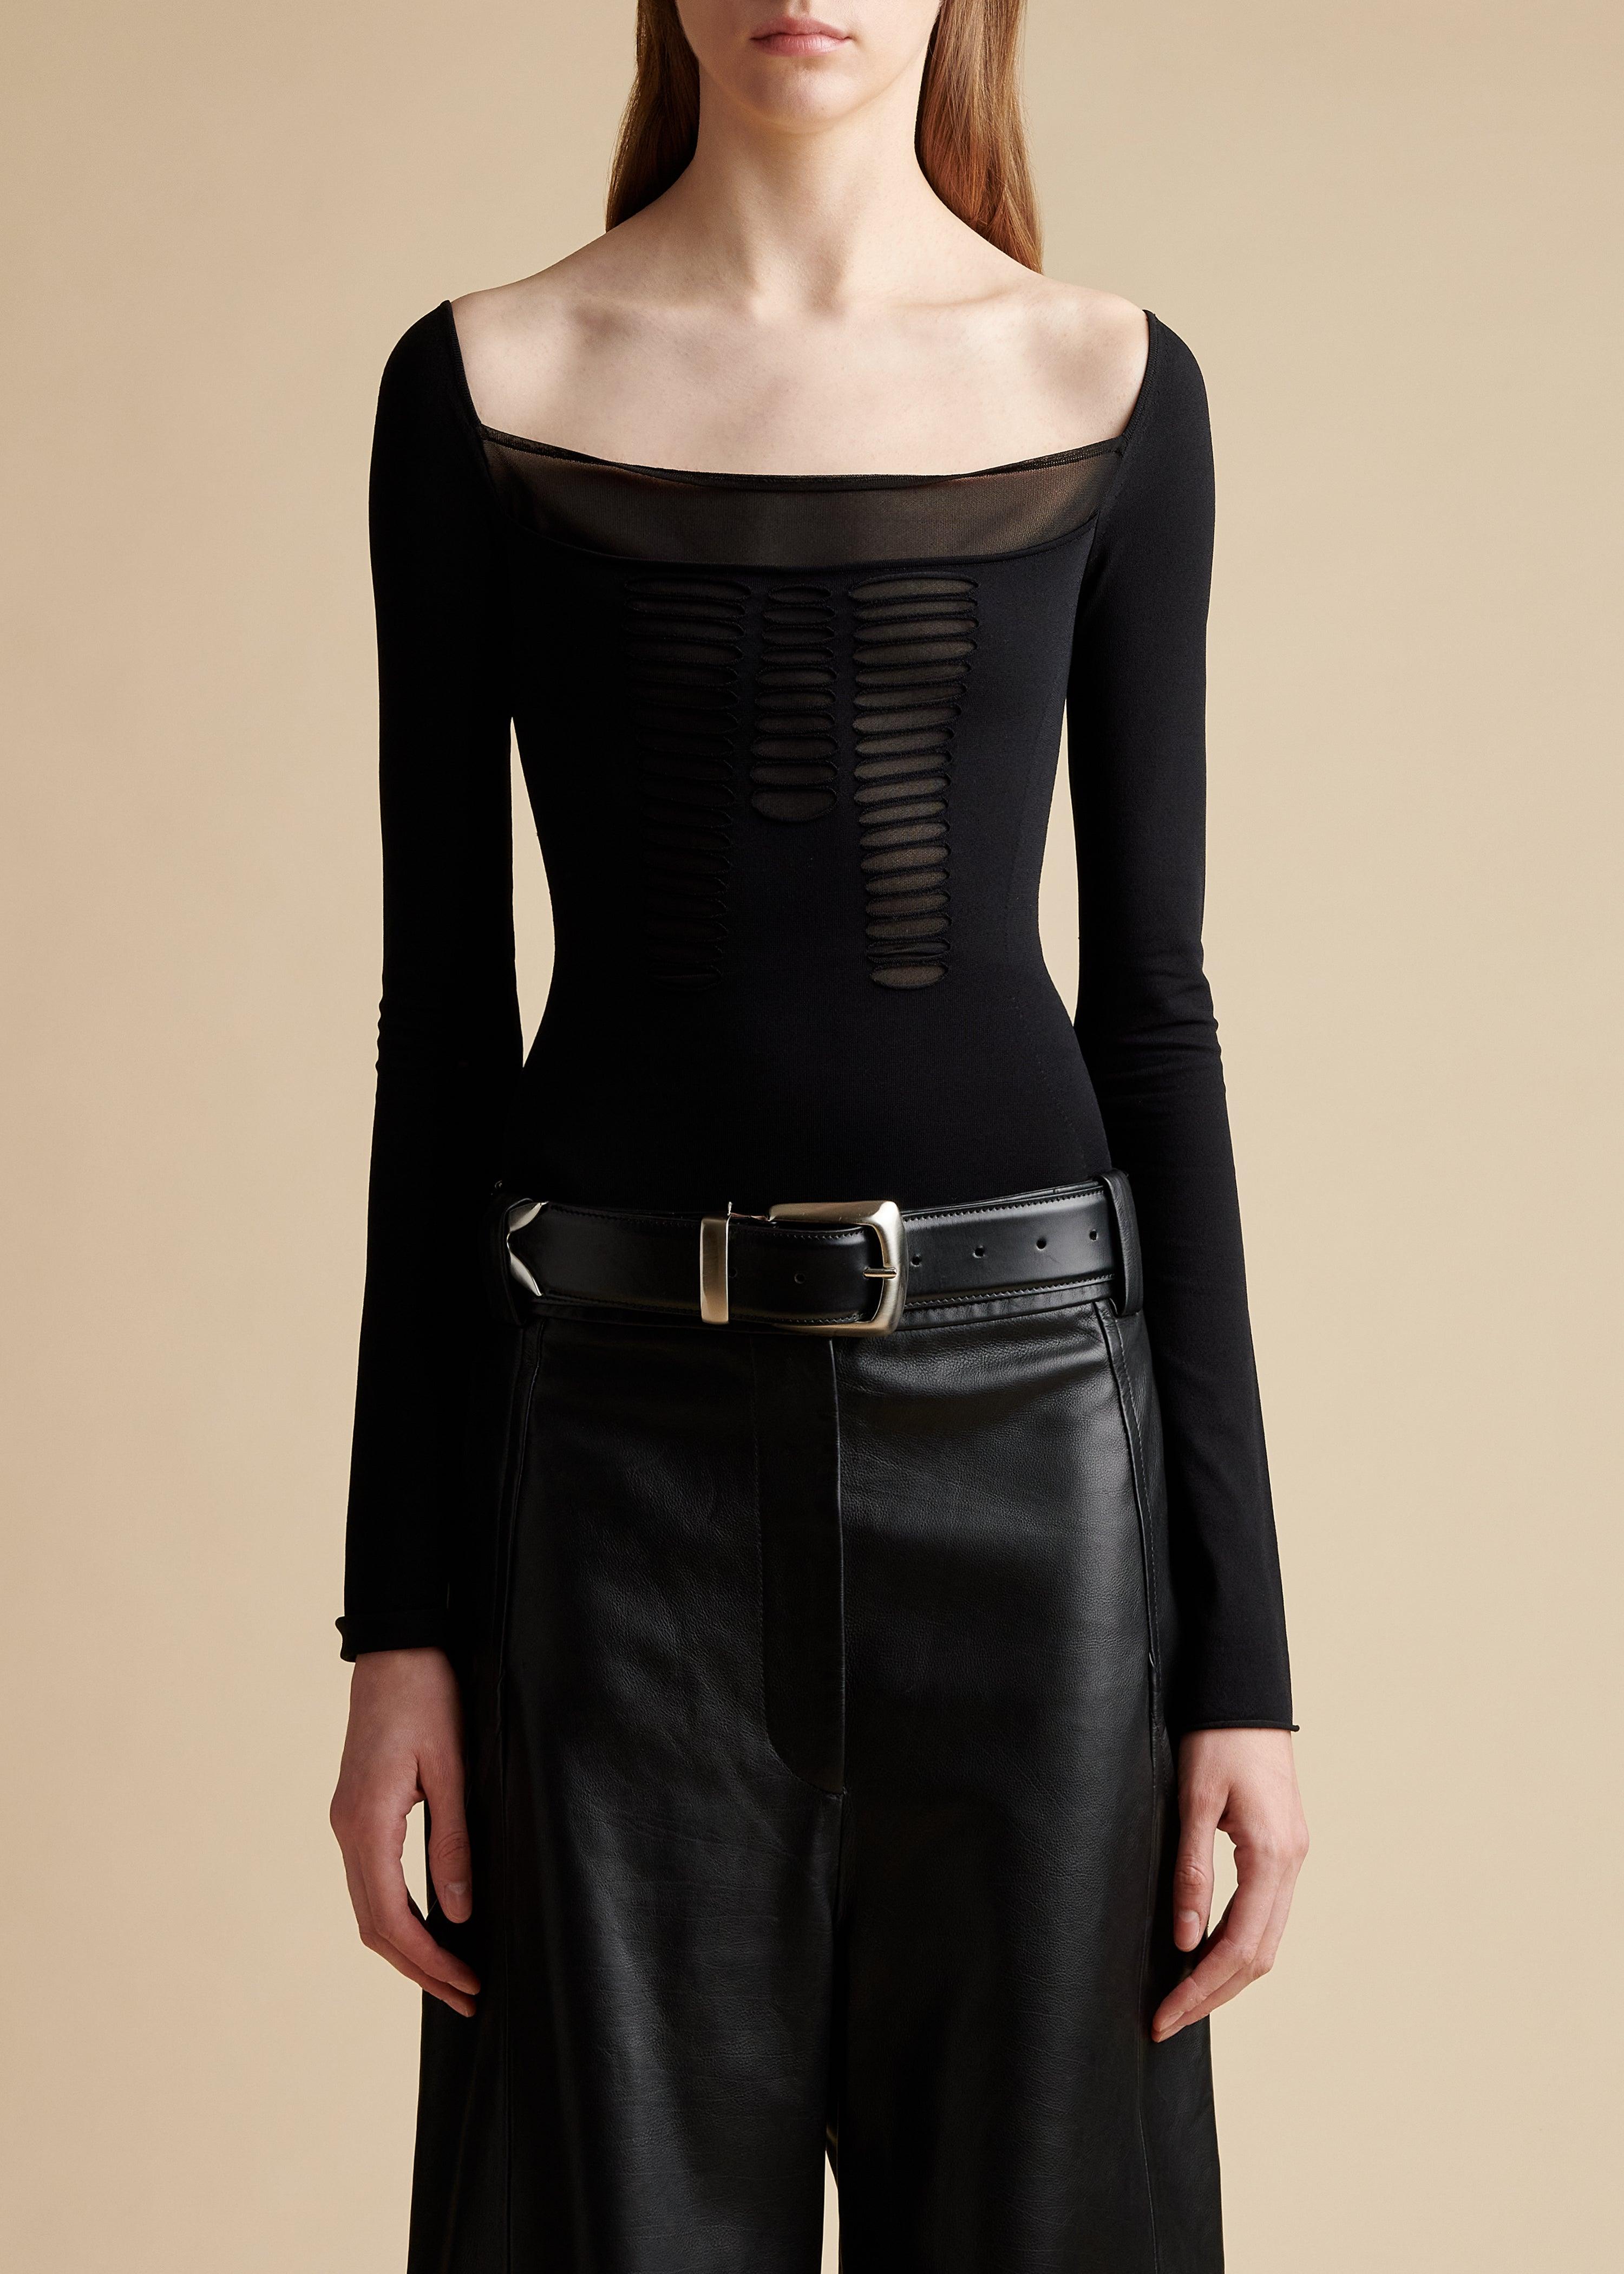 The Aslana Top in Black - The Iconic Issue